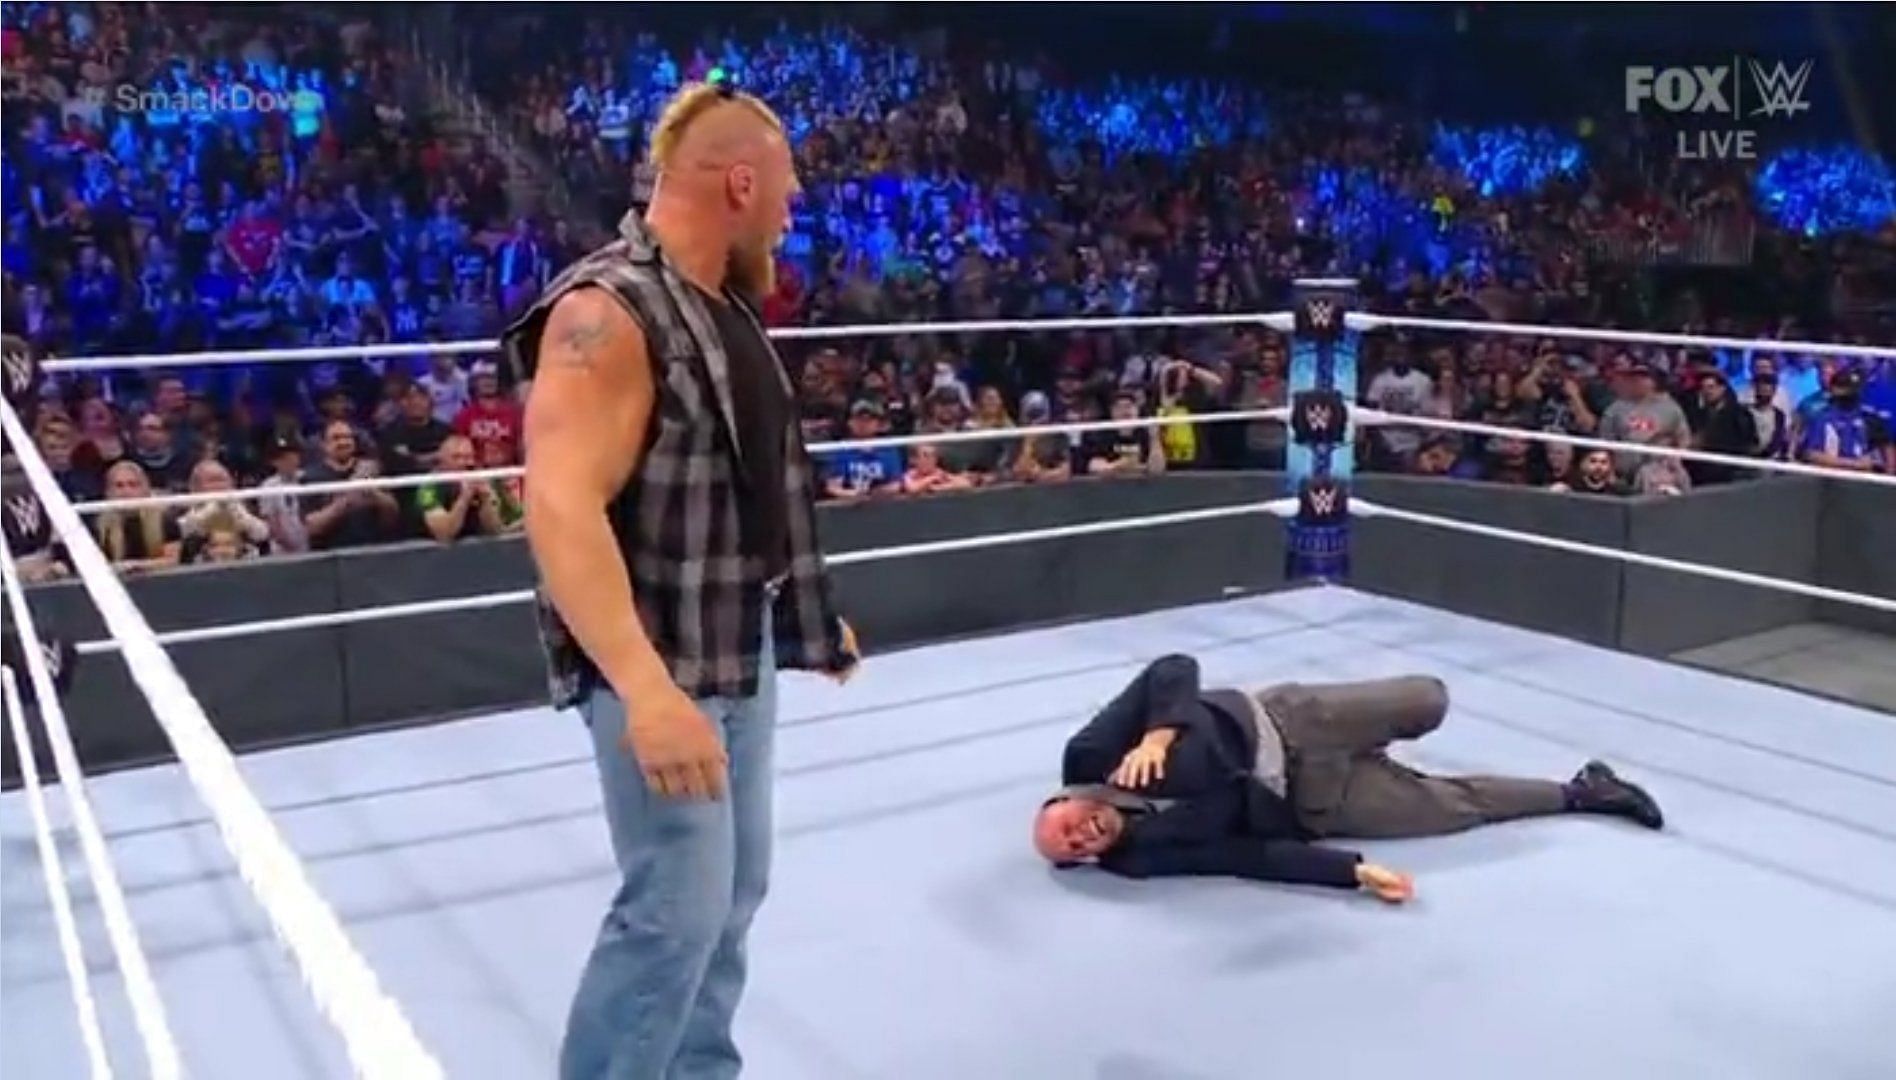 Adam Pearce was left senseless in the ring by an enraged Brock Lesnar